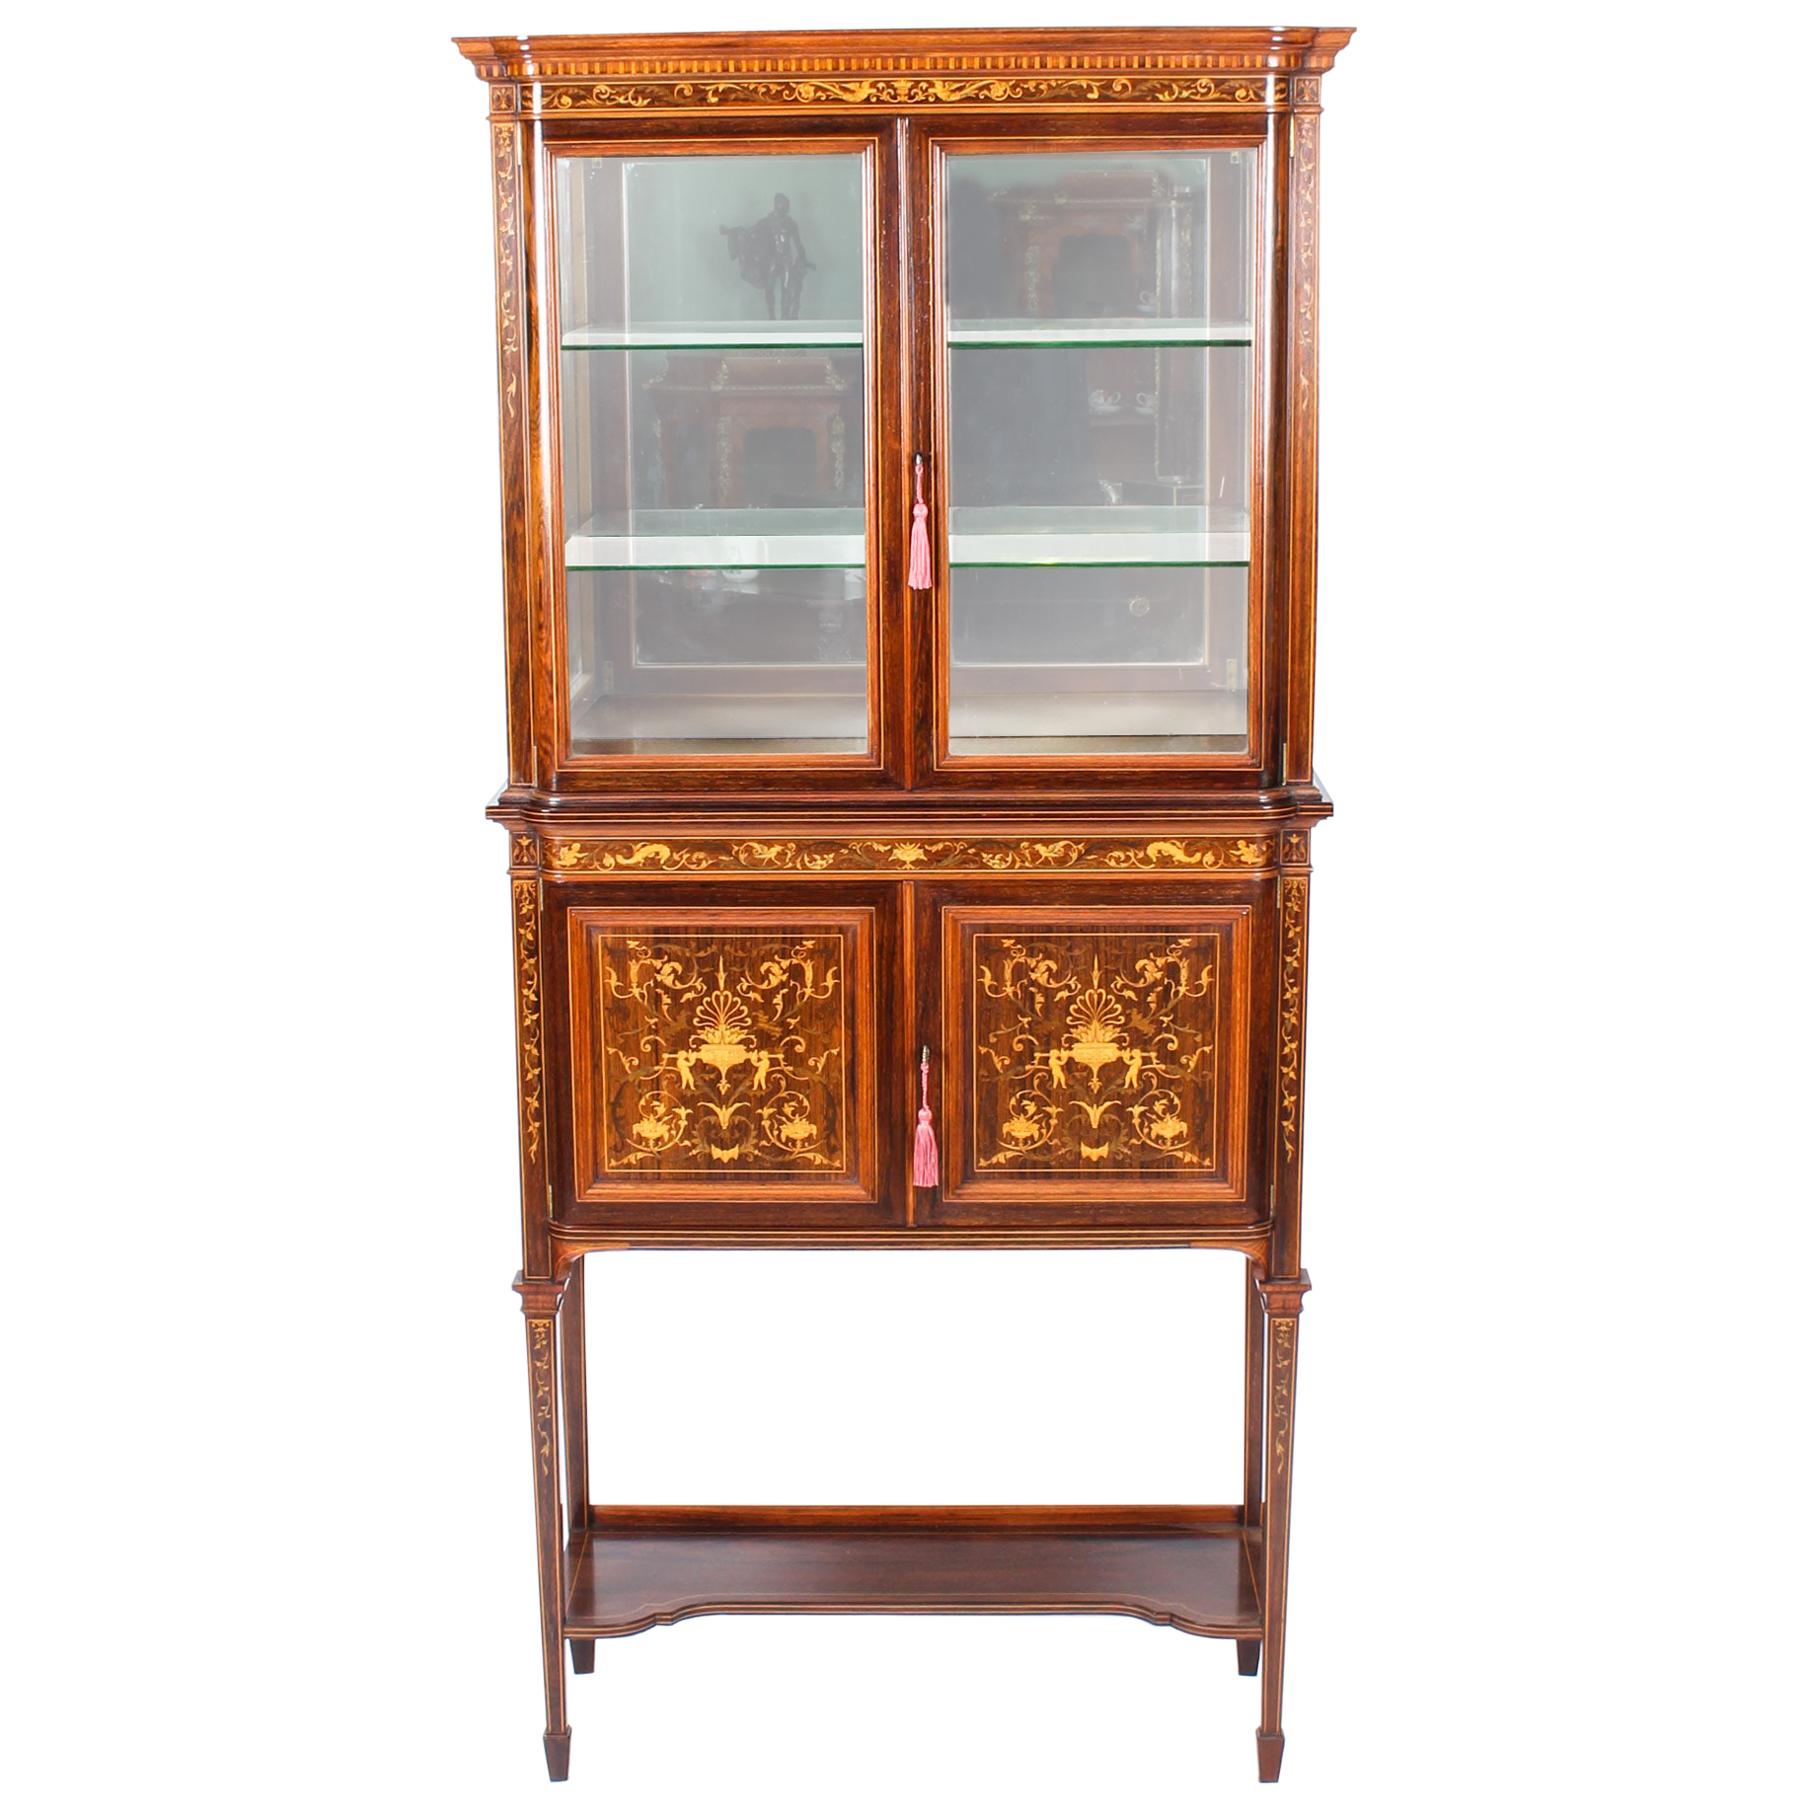 Antique Edwardian Inlaid Display Cabinet by Edwards & Roberts, 19th Century For Sale